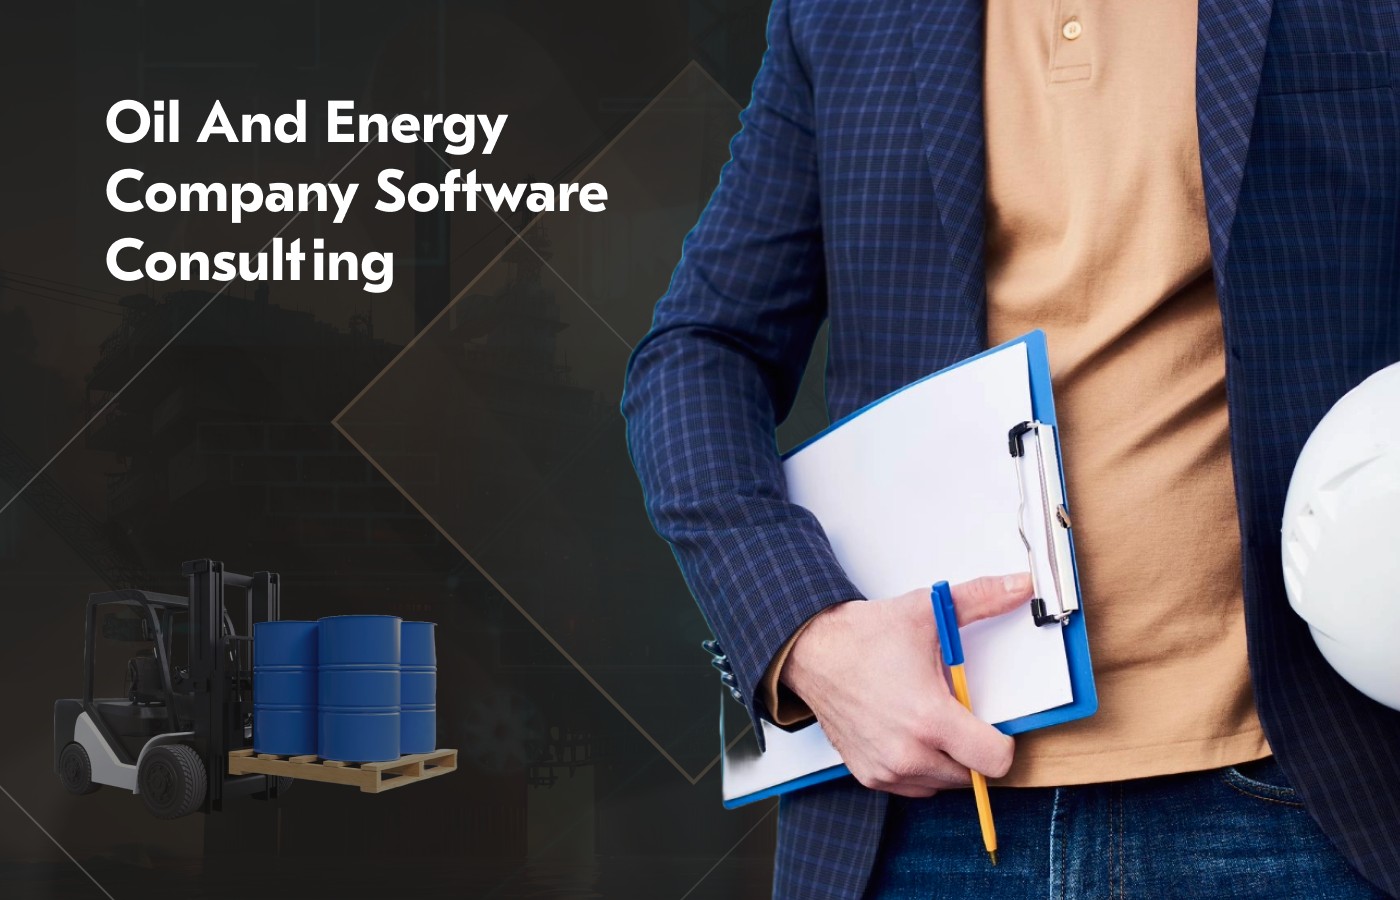 Oil and Energy Company Software Consulting Services